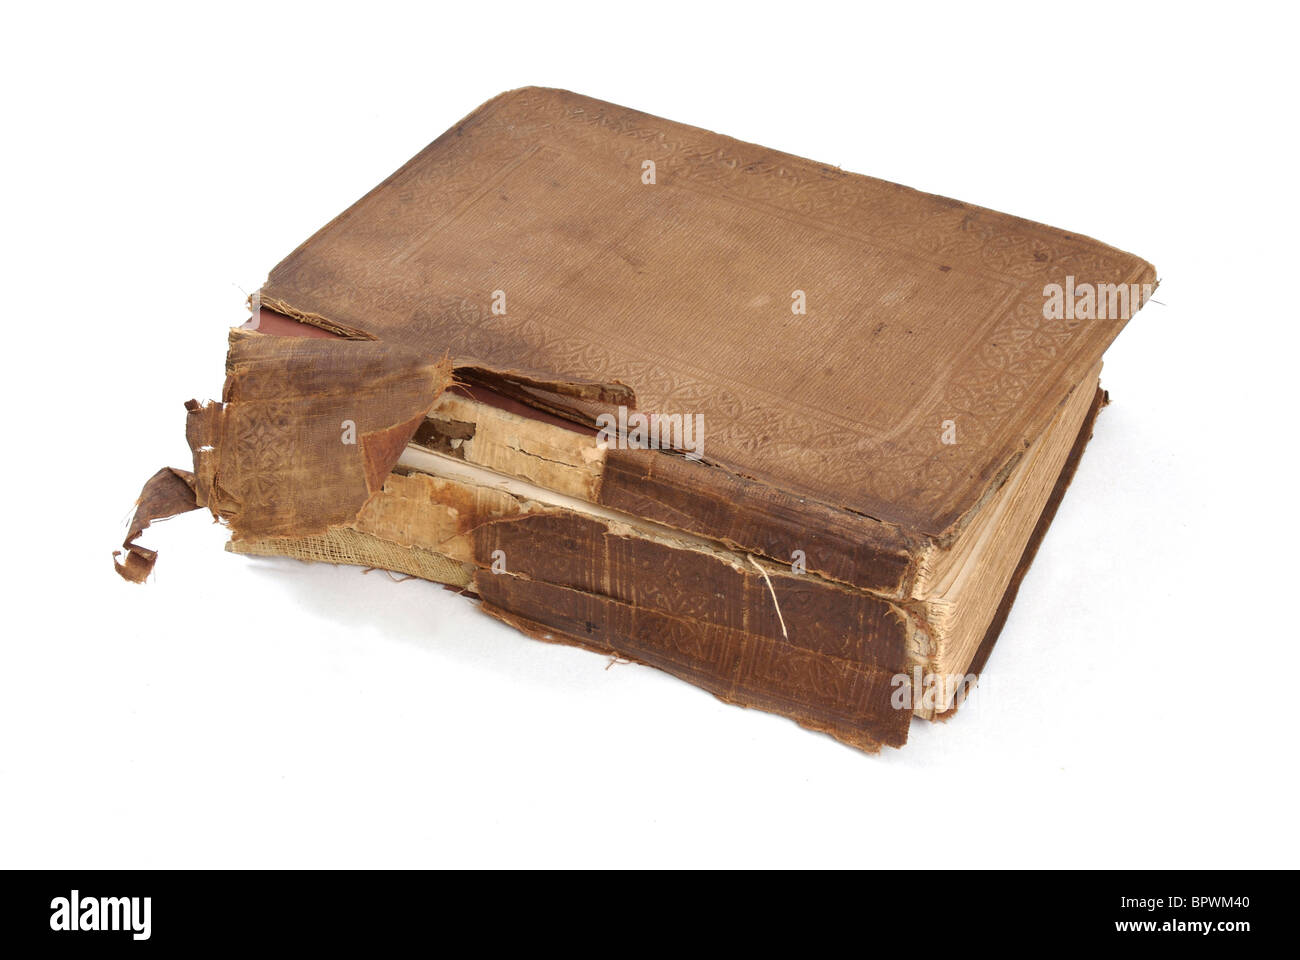 An old book in bad condition with a broken spine Stock Photo